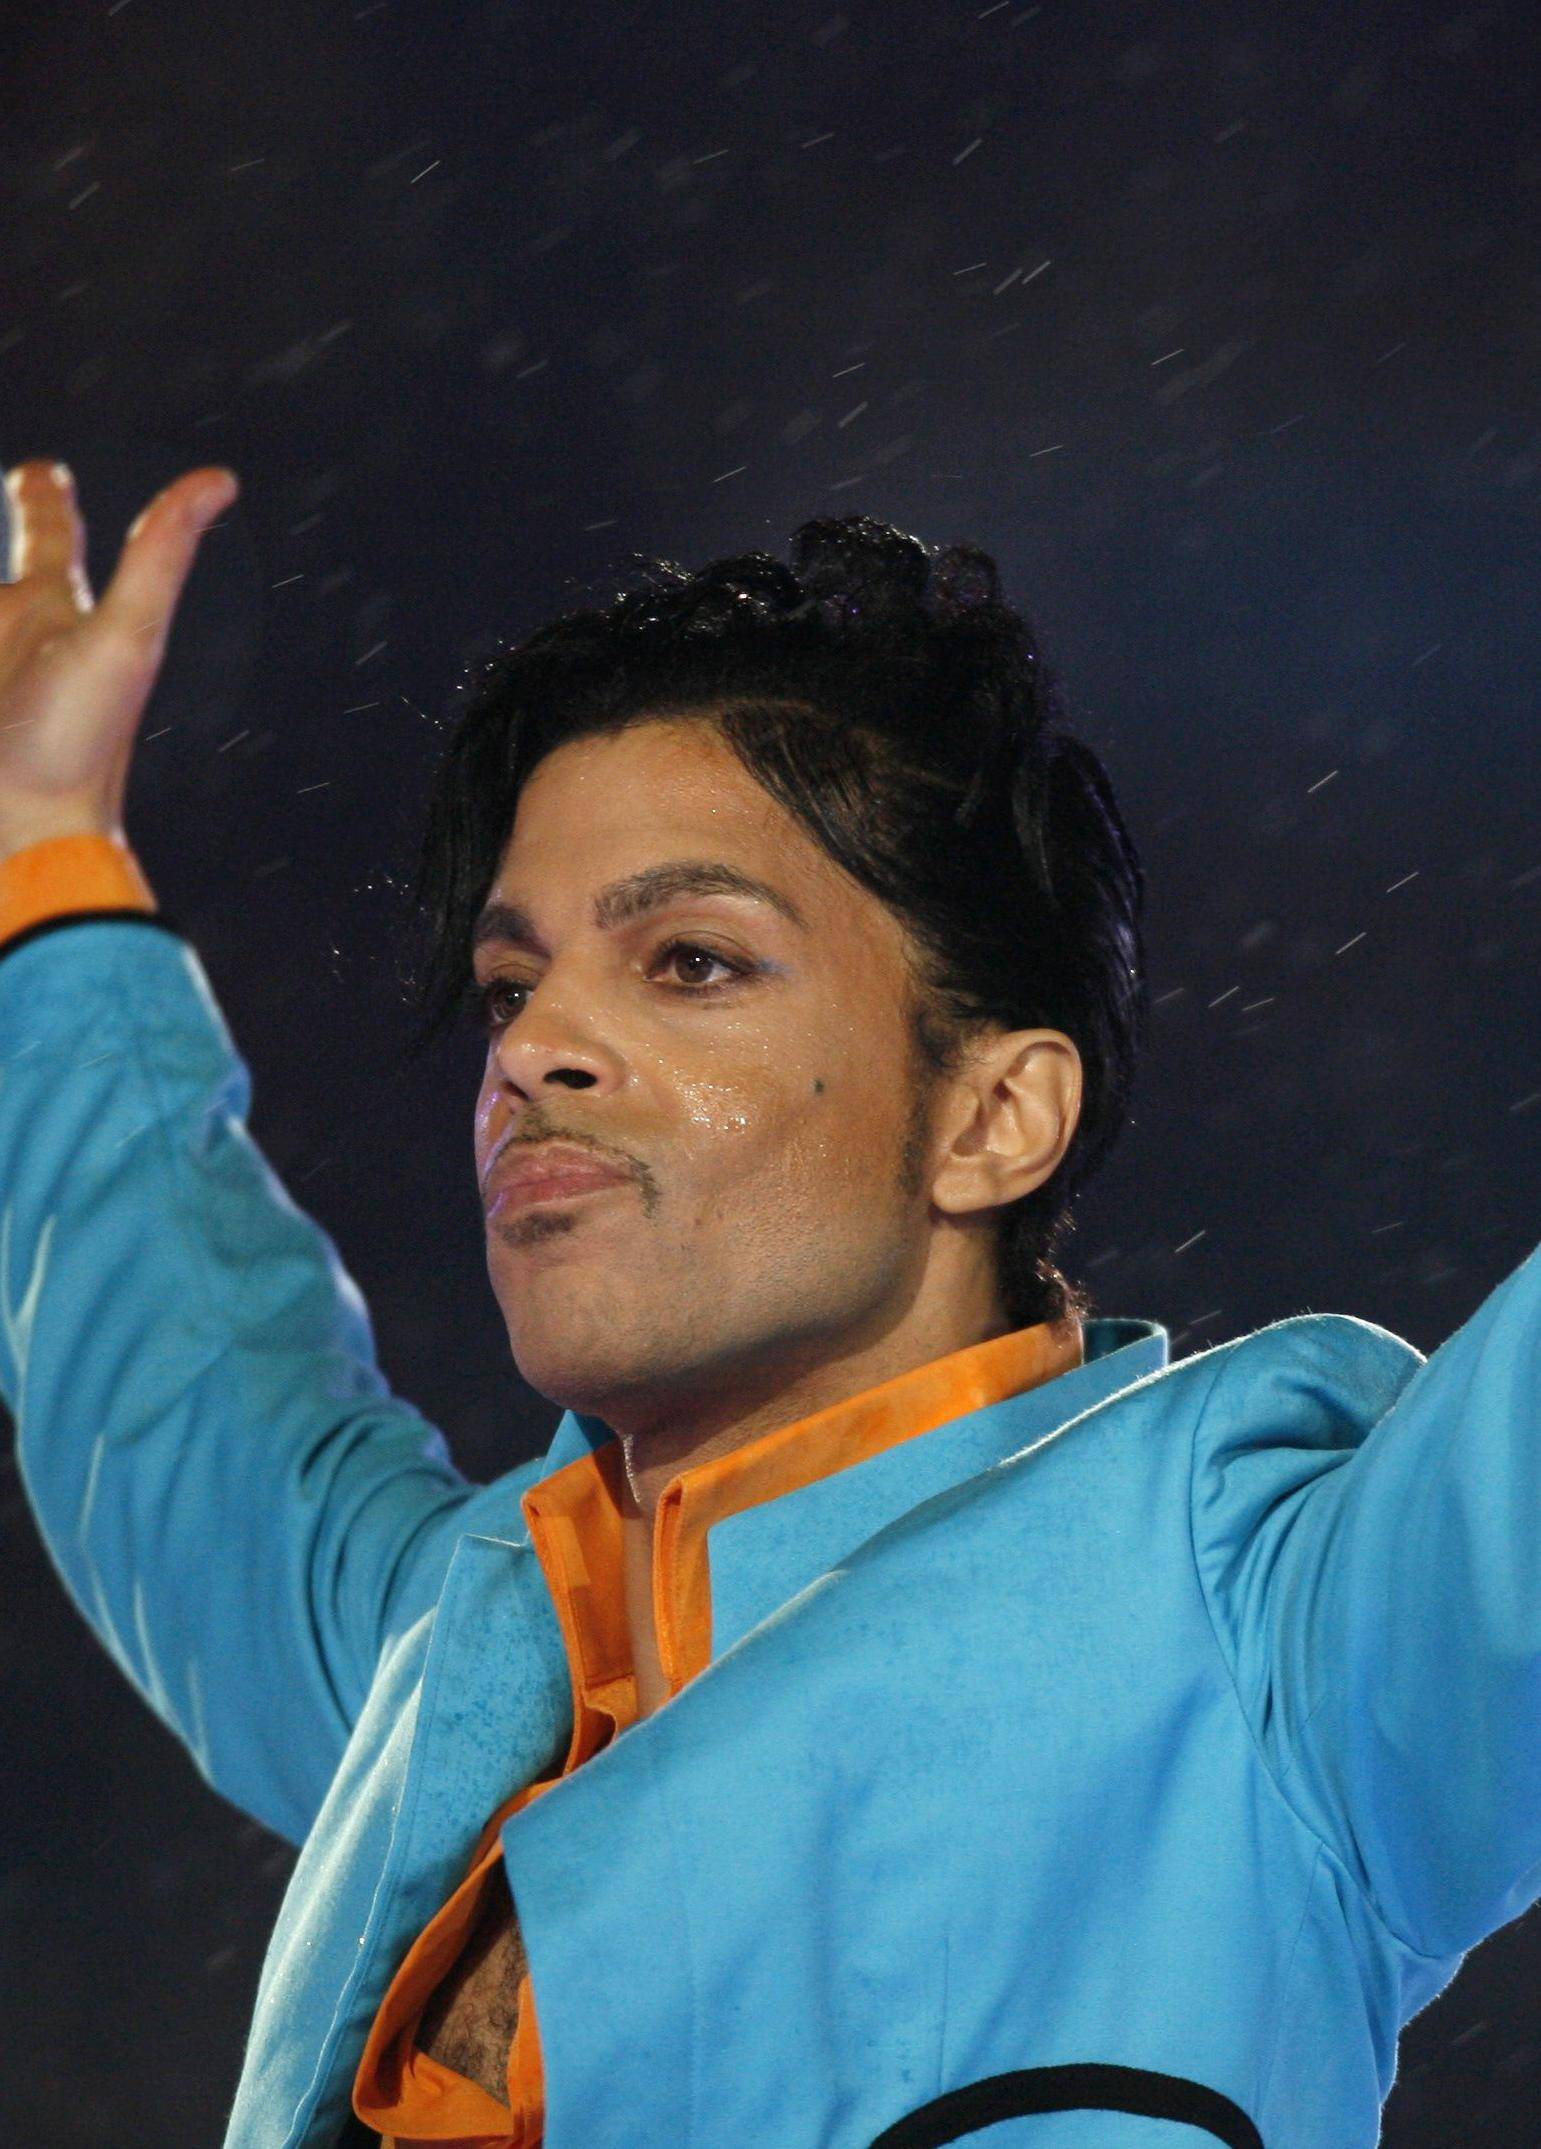 Prince performs during halftime show of the NFL's Super Bowl XLI football game between the Colts and the Bears in Miami